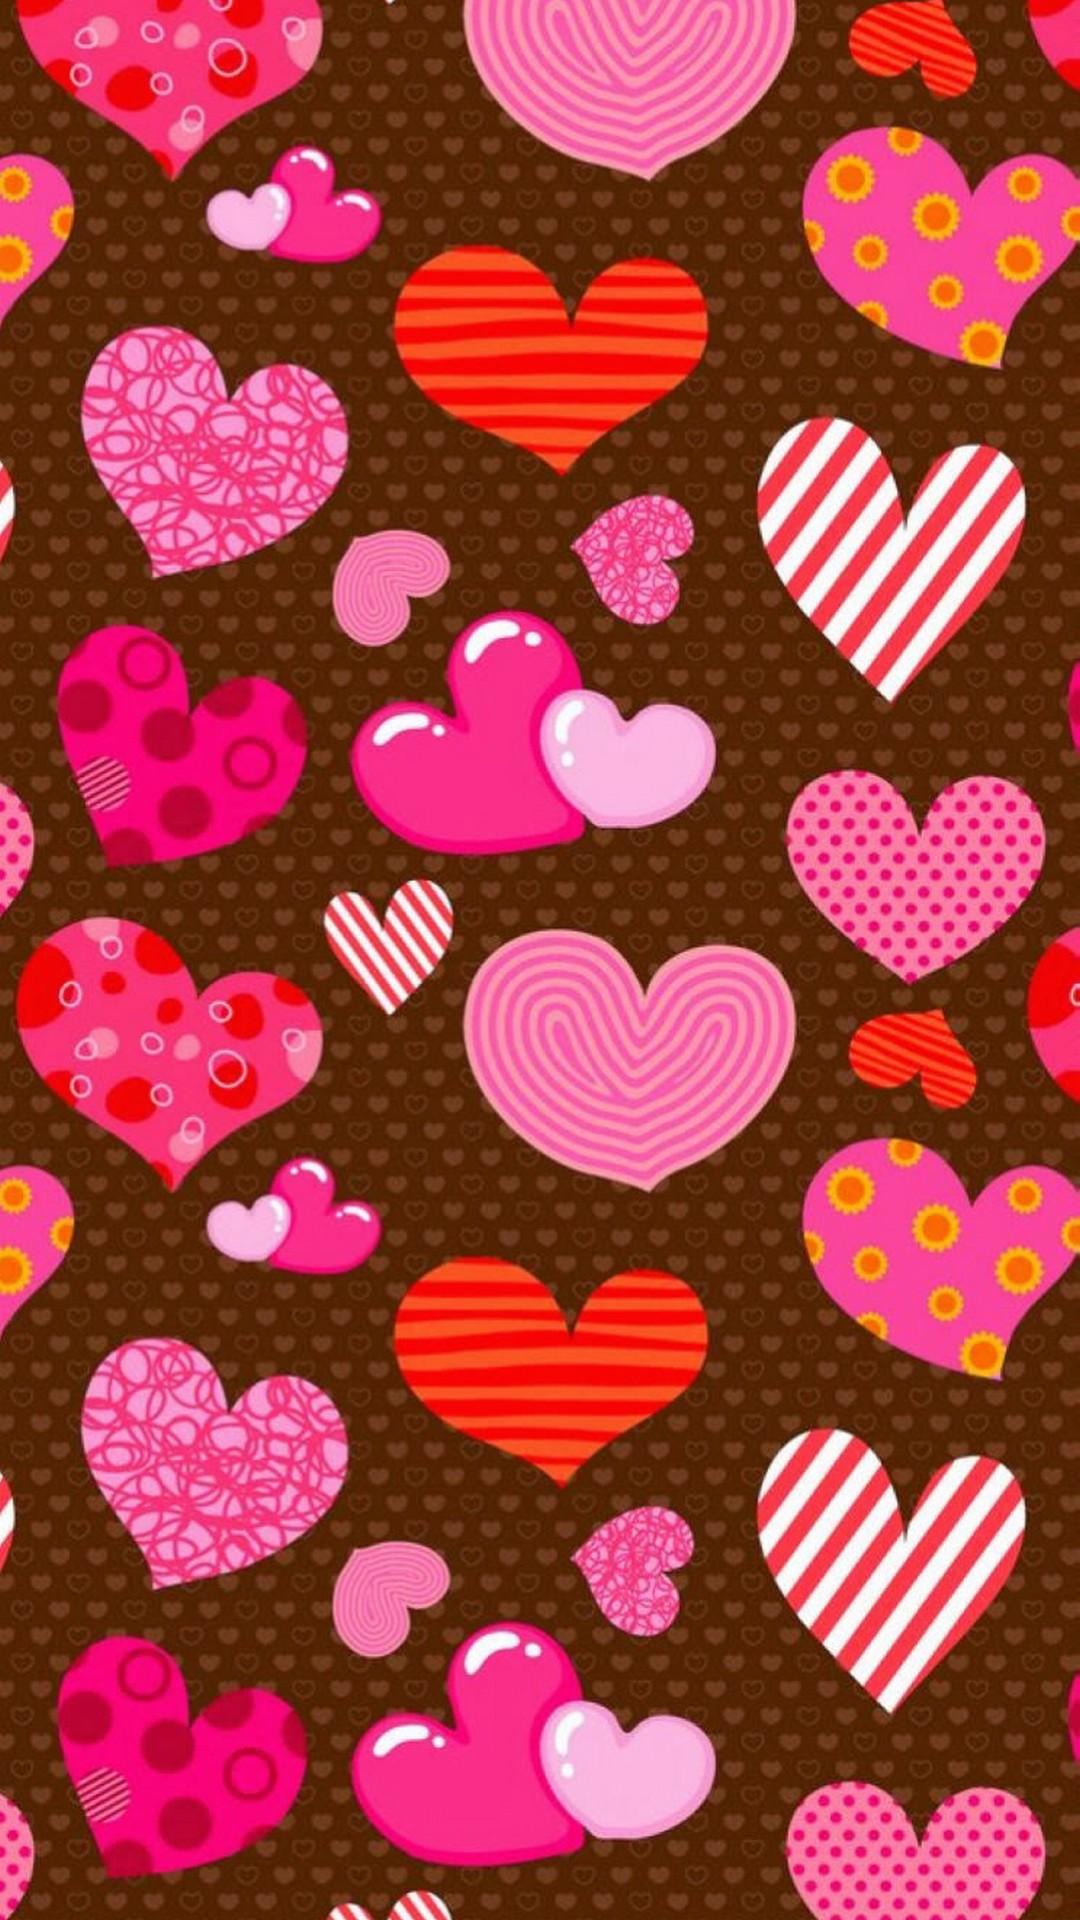 Valentine Iphone Wallpapers